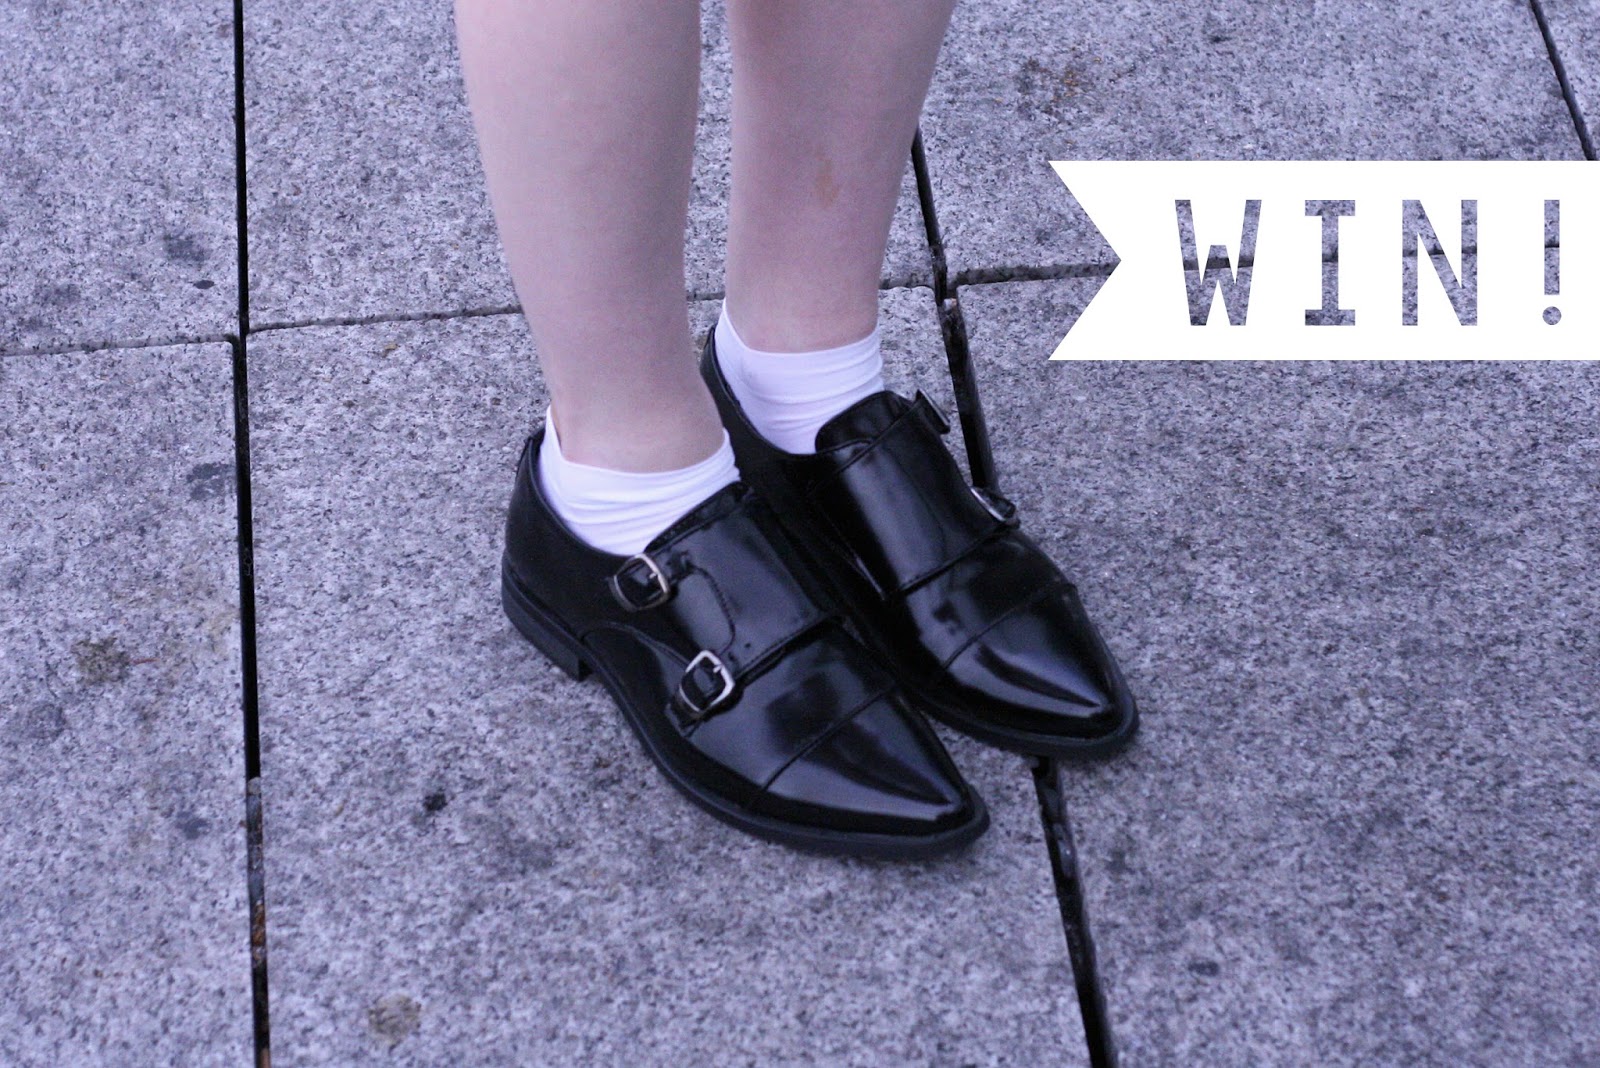 GIVEAWAY | Win Spy Love Buy shoes of your choice!